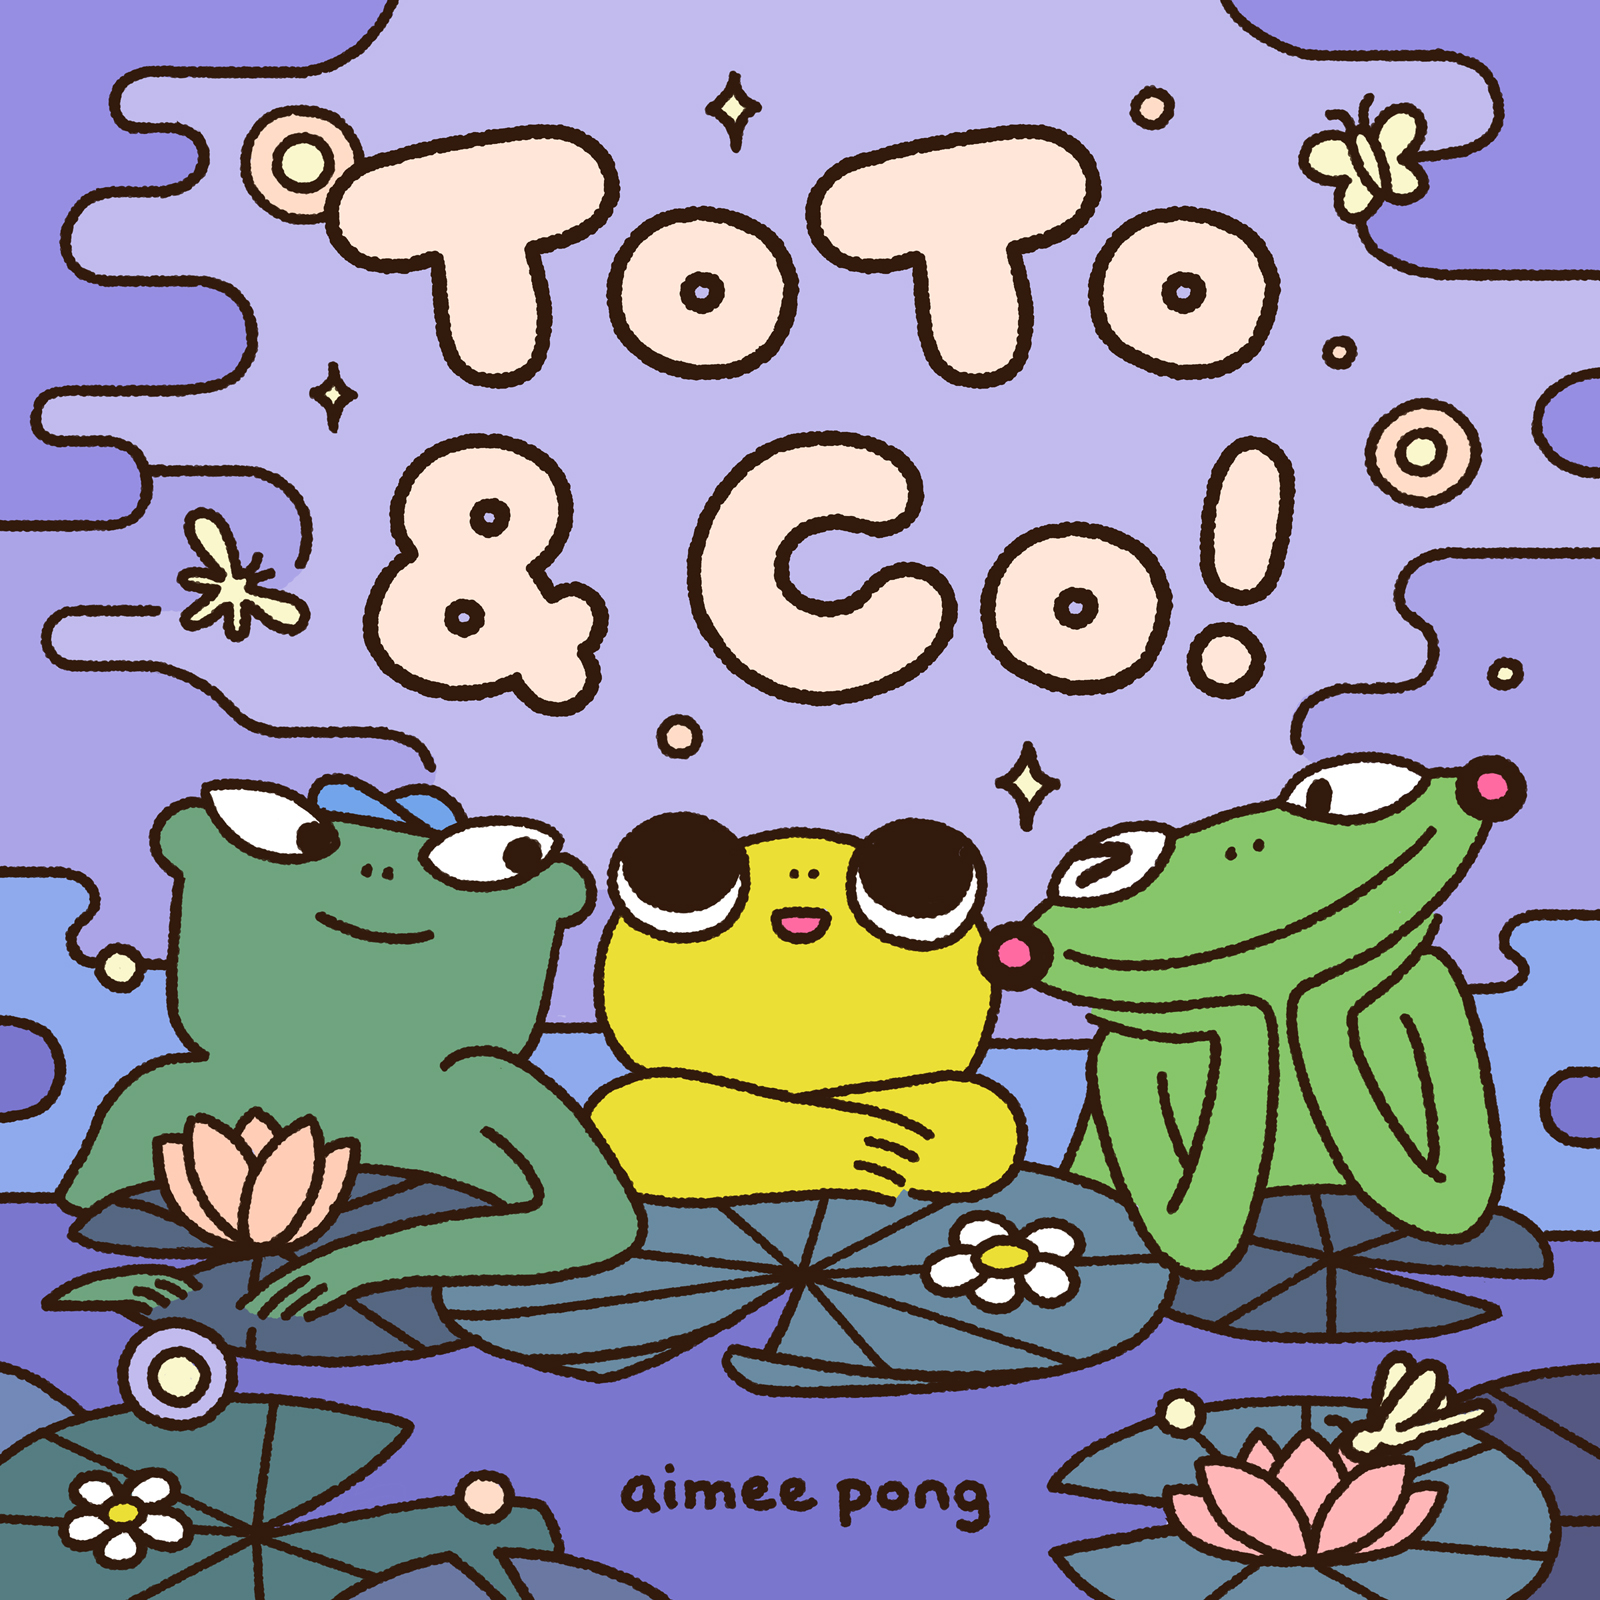 Toto & Co!